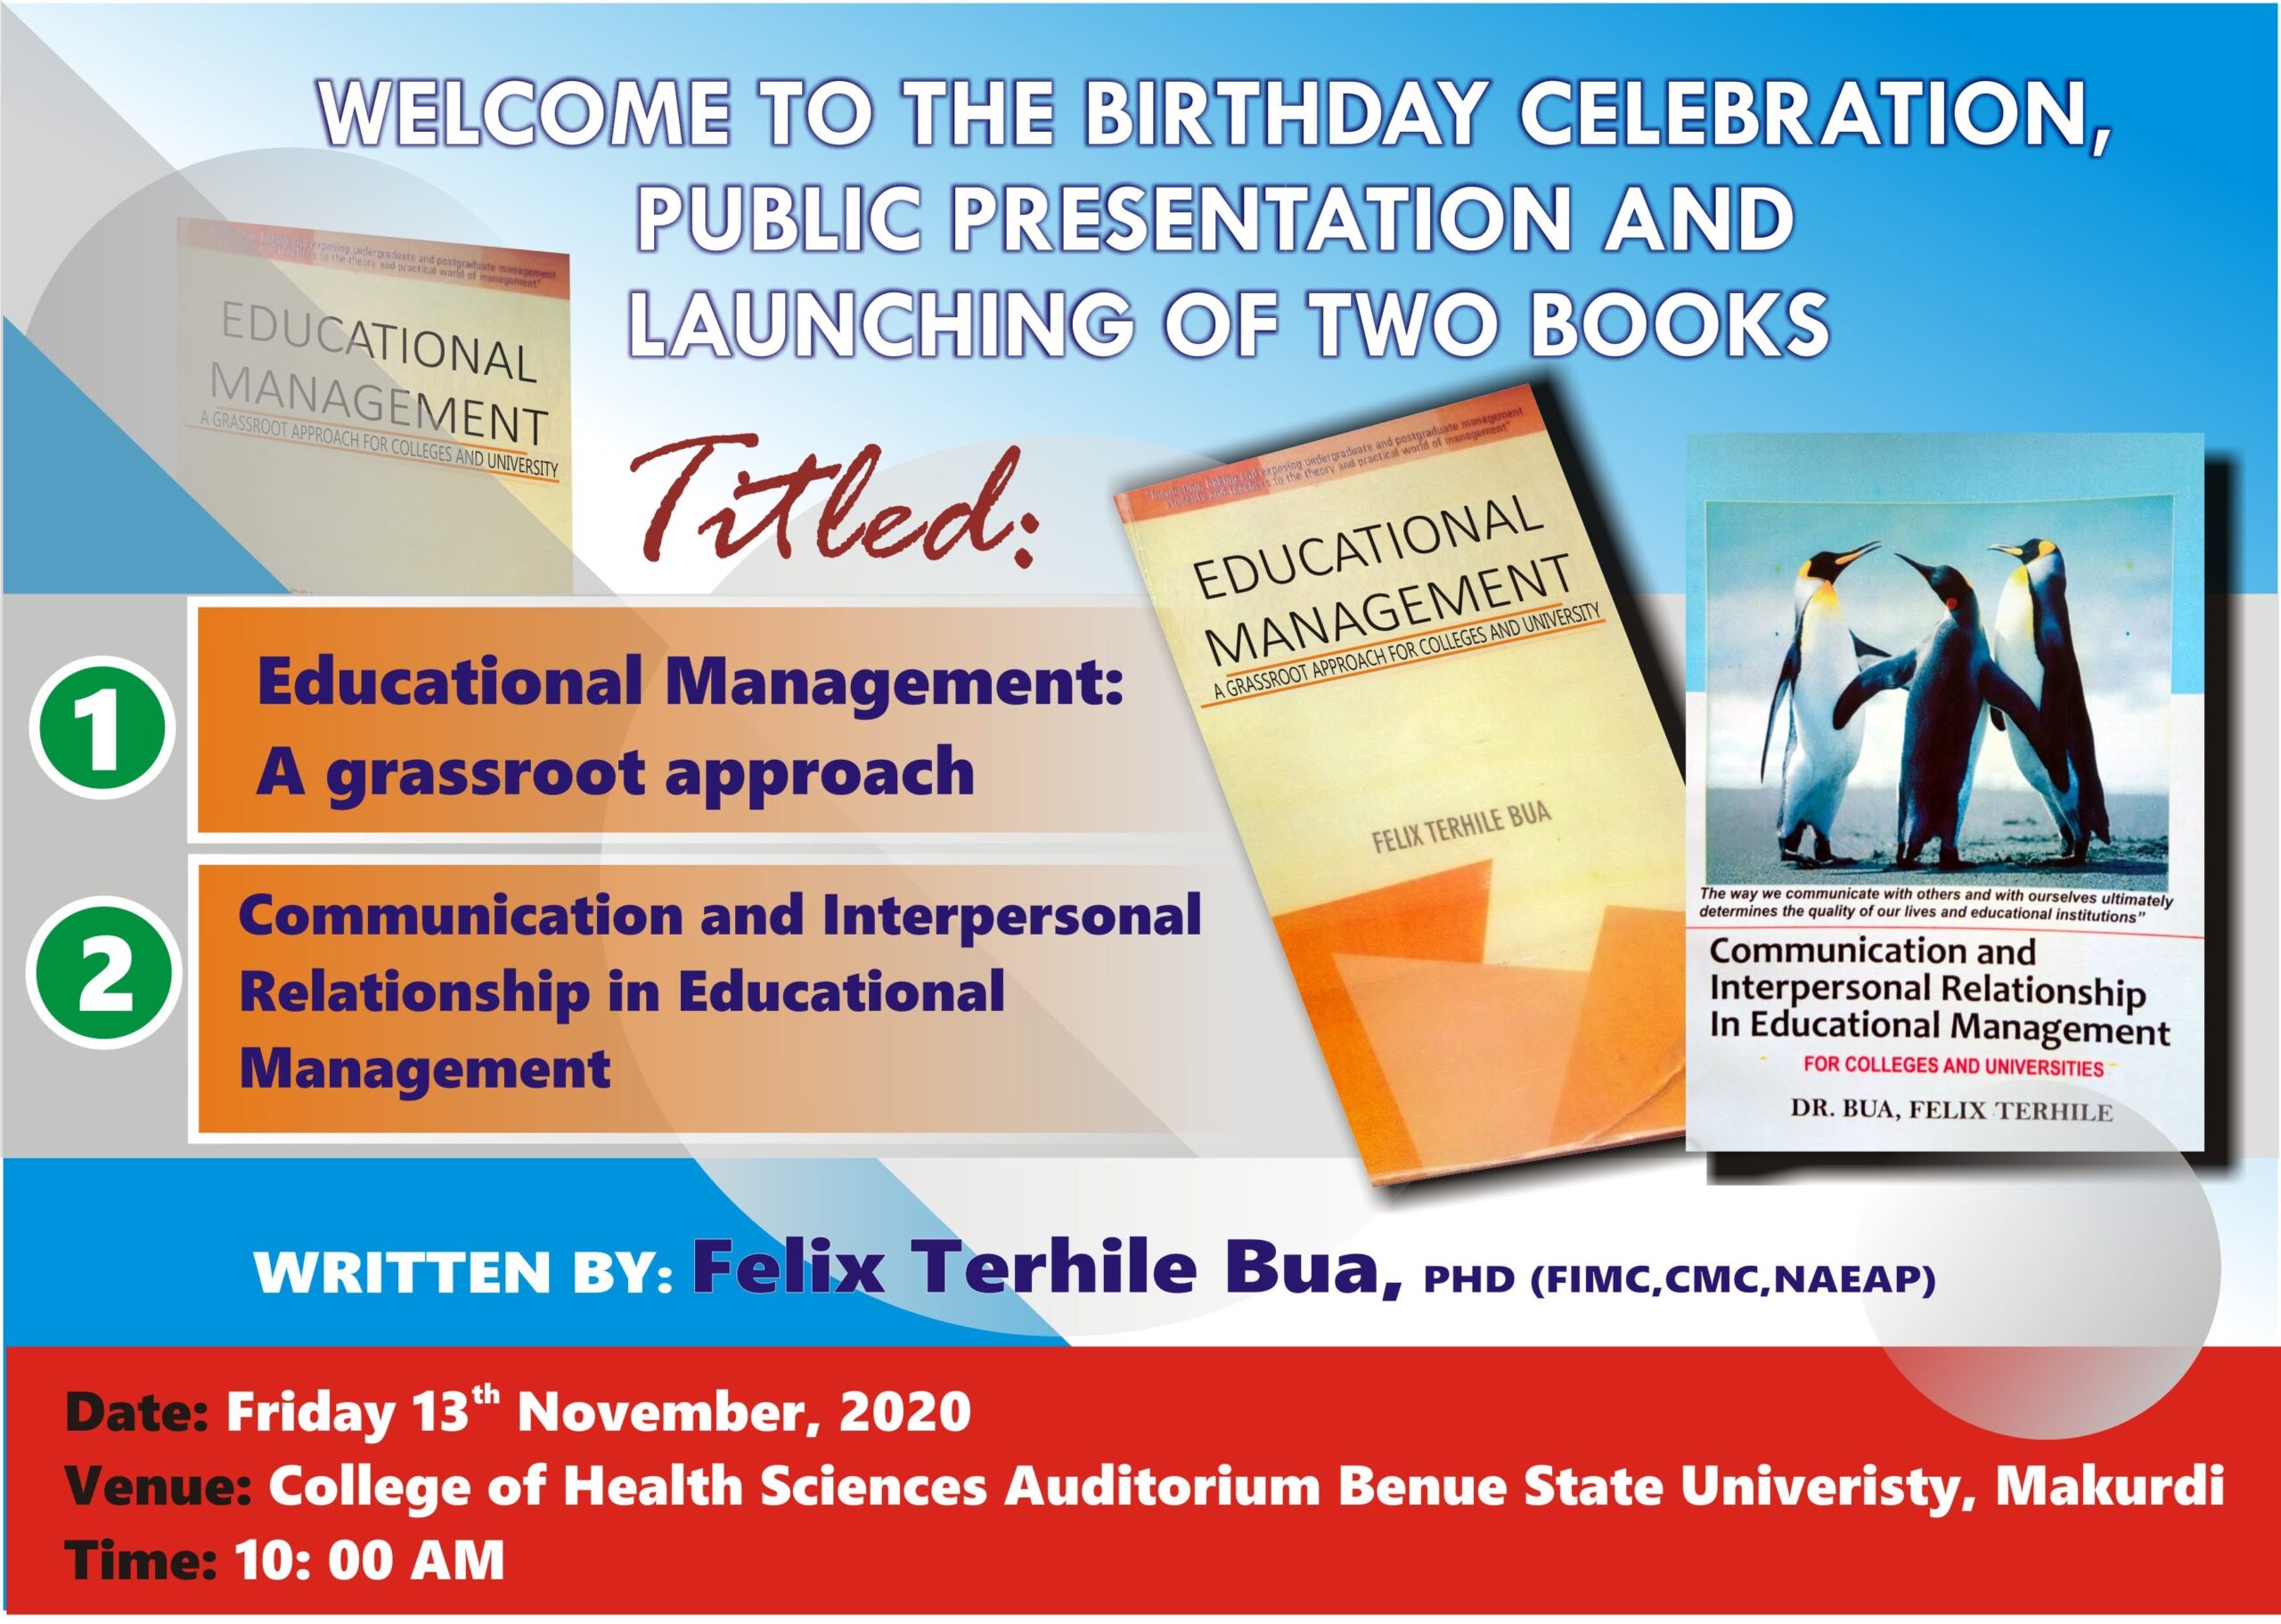 Welcome to the Birthday Celebration, Public Presentation and Launching of Two Books